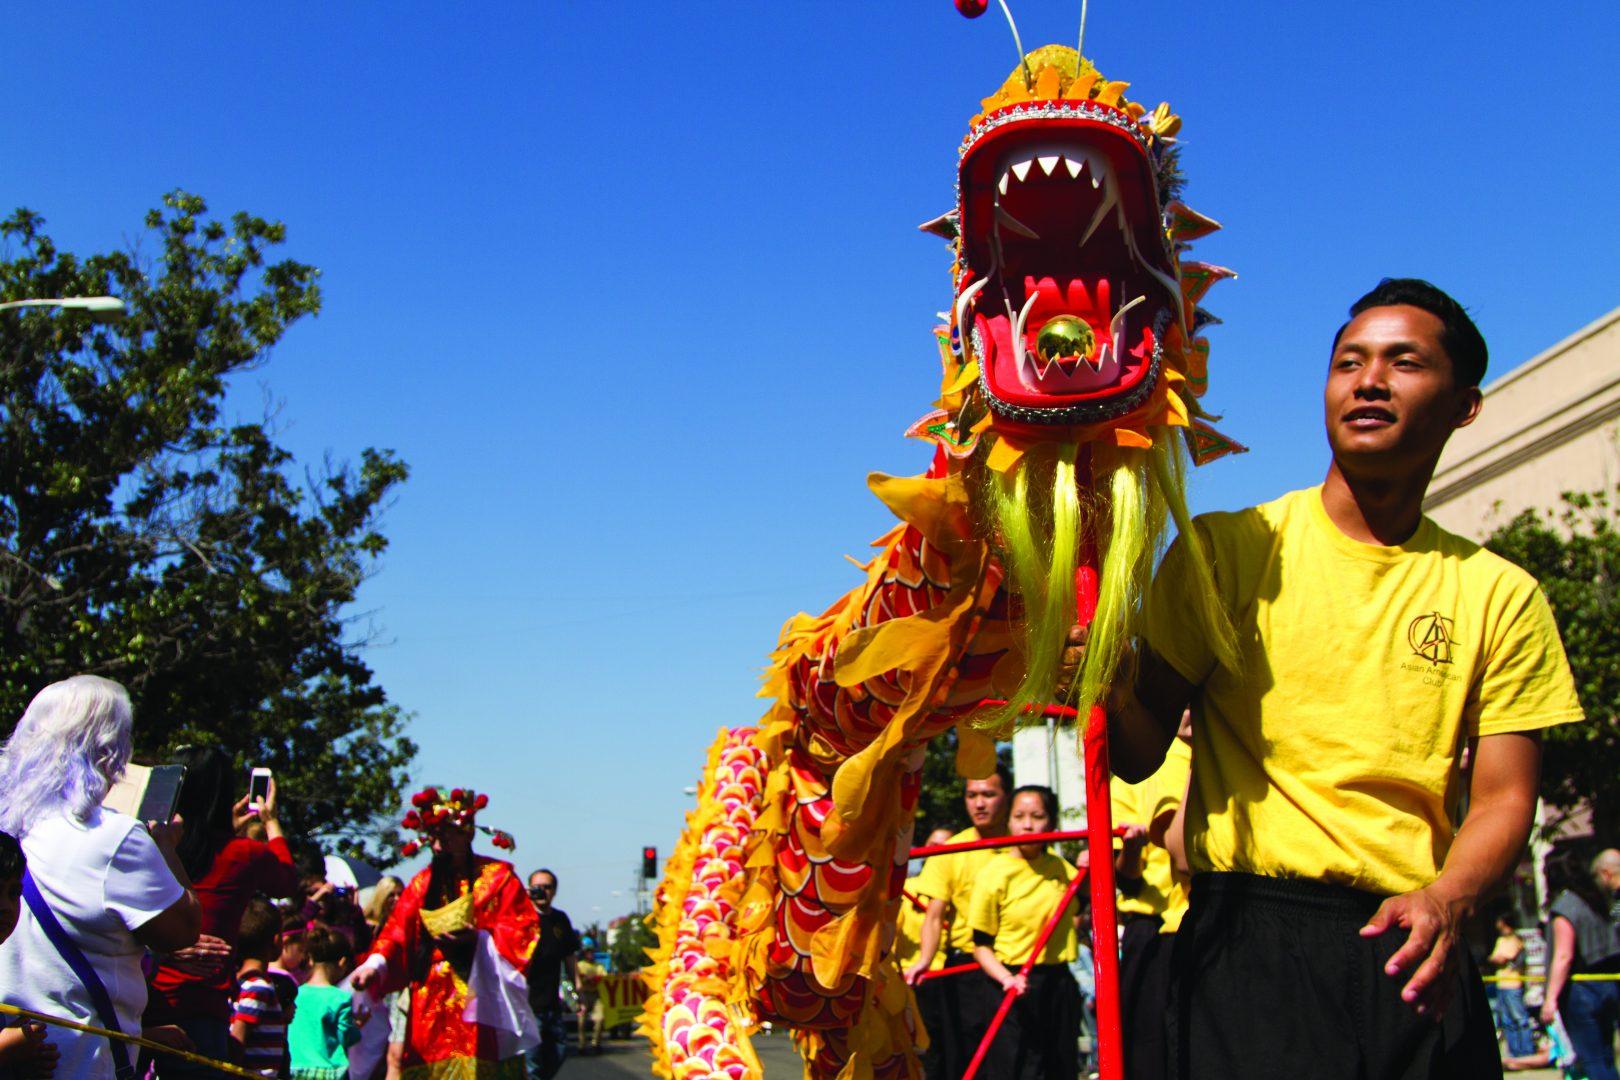 Chinese+New+Year+celebration+comes+to+Fresno